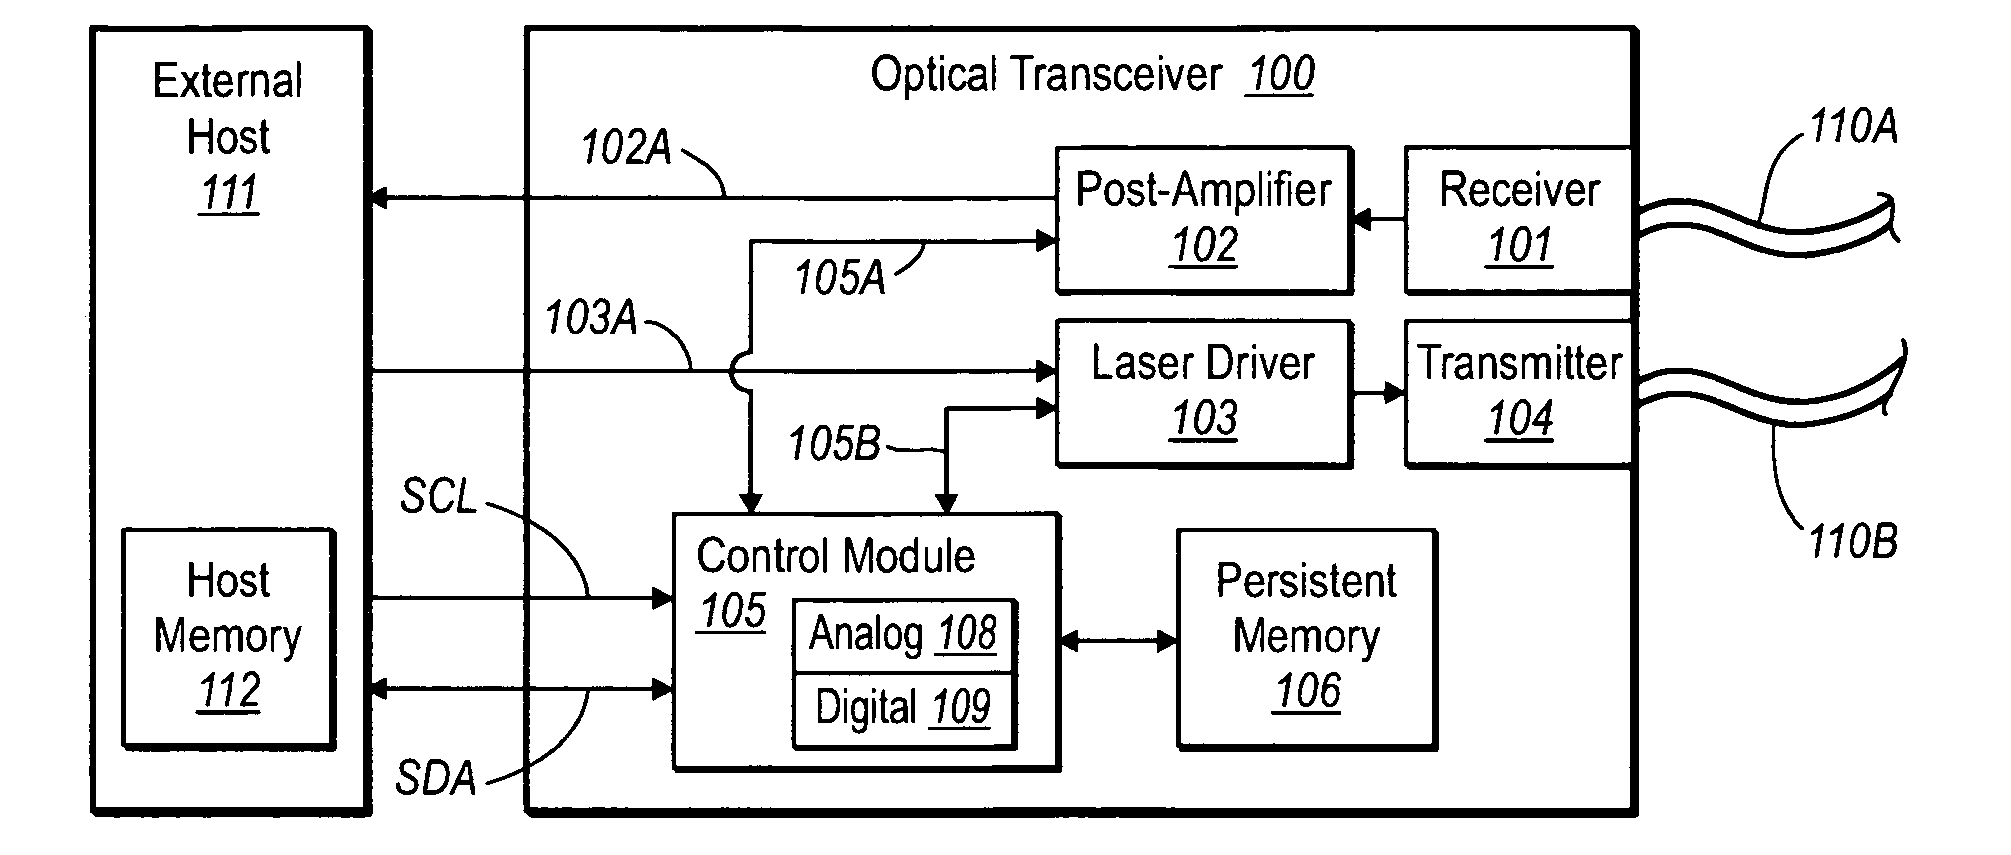 Compensation for temperature and voltage effects when monitoring parameters in a transceiver module